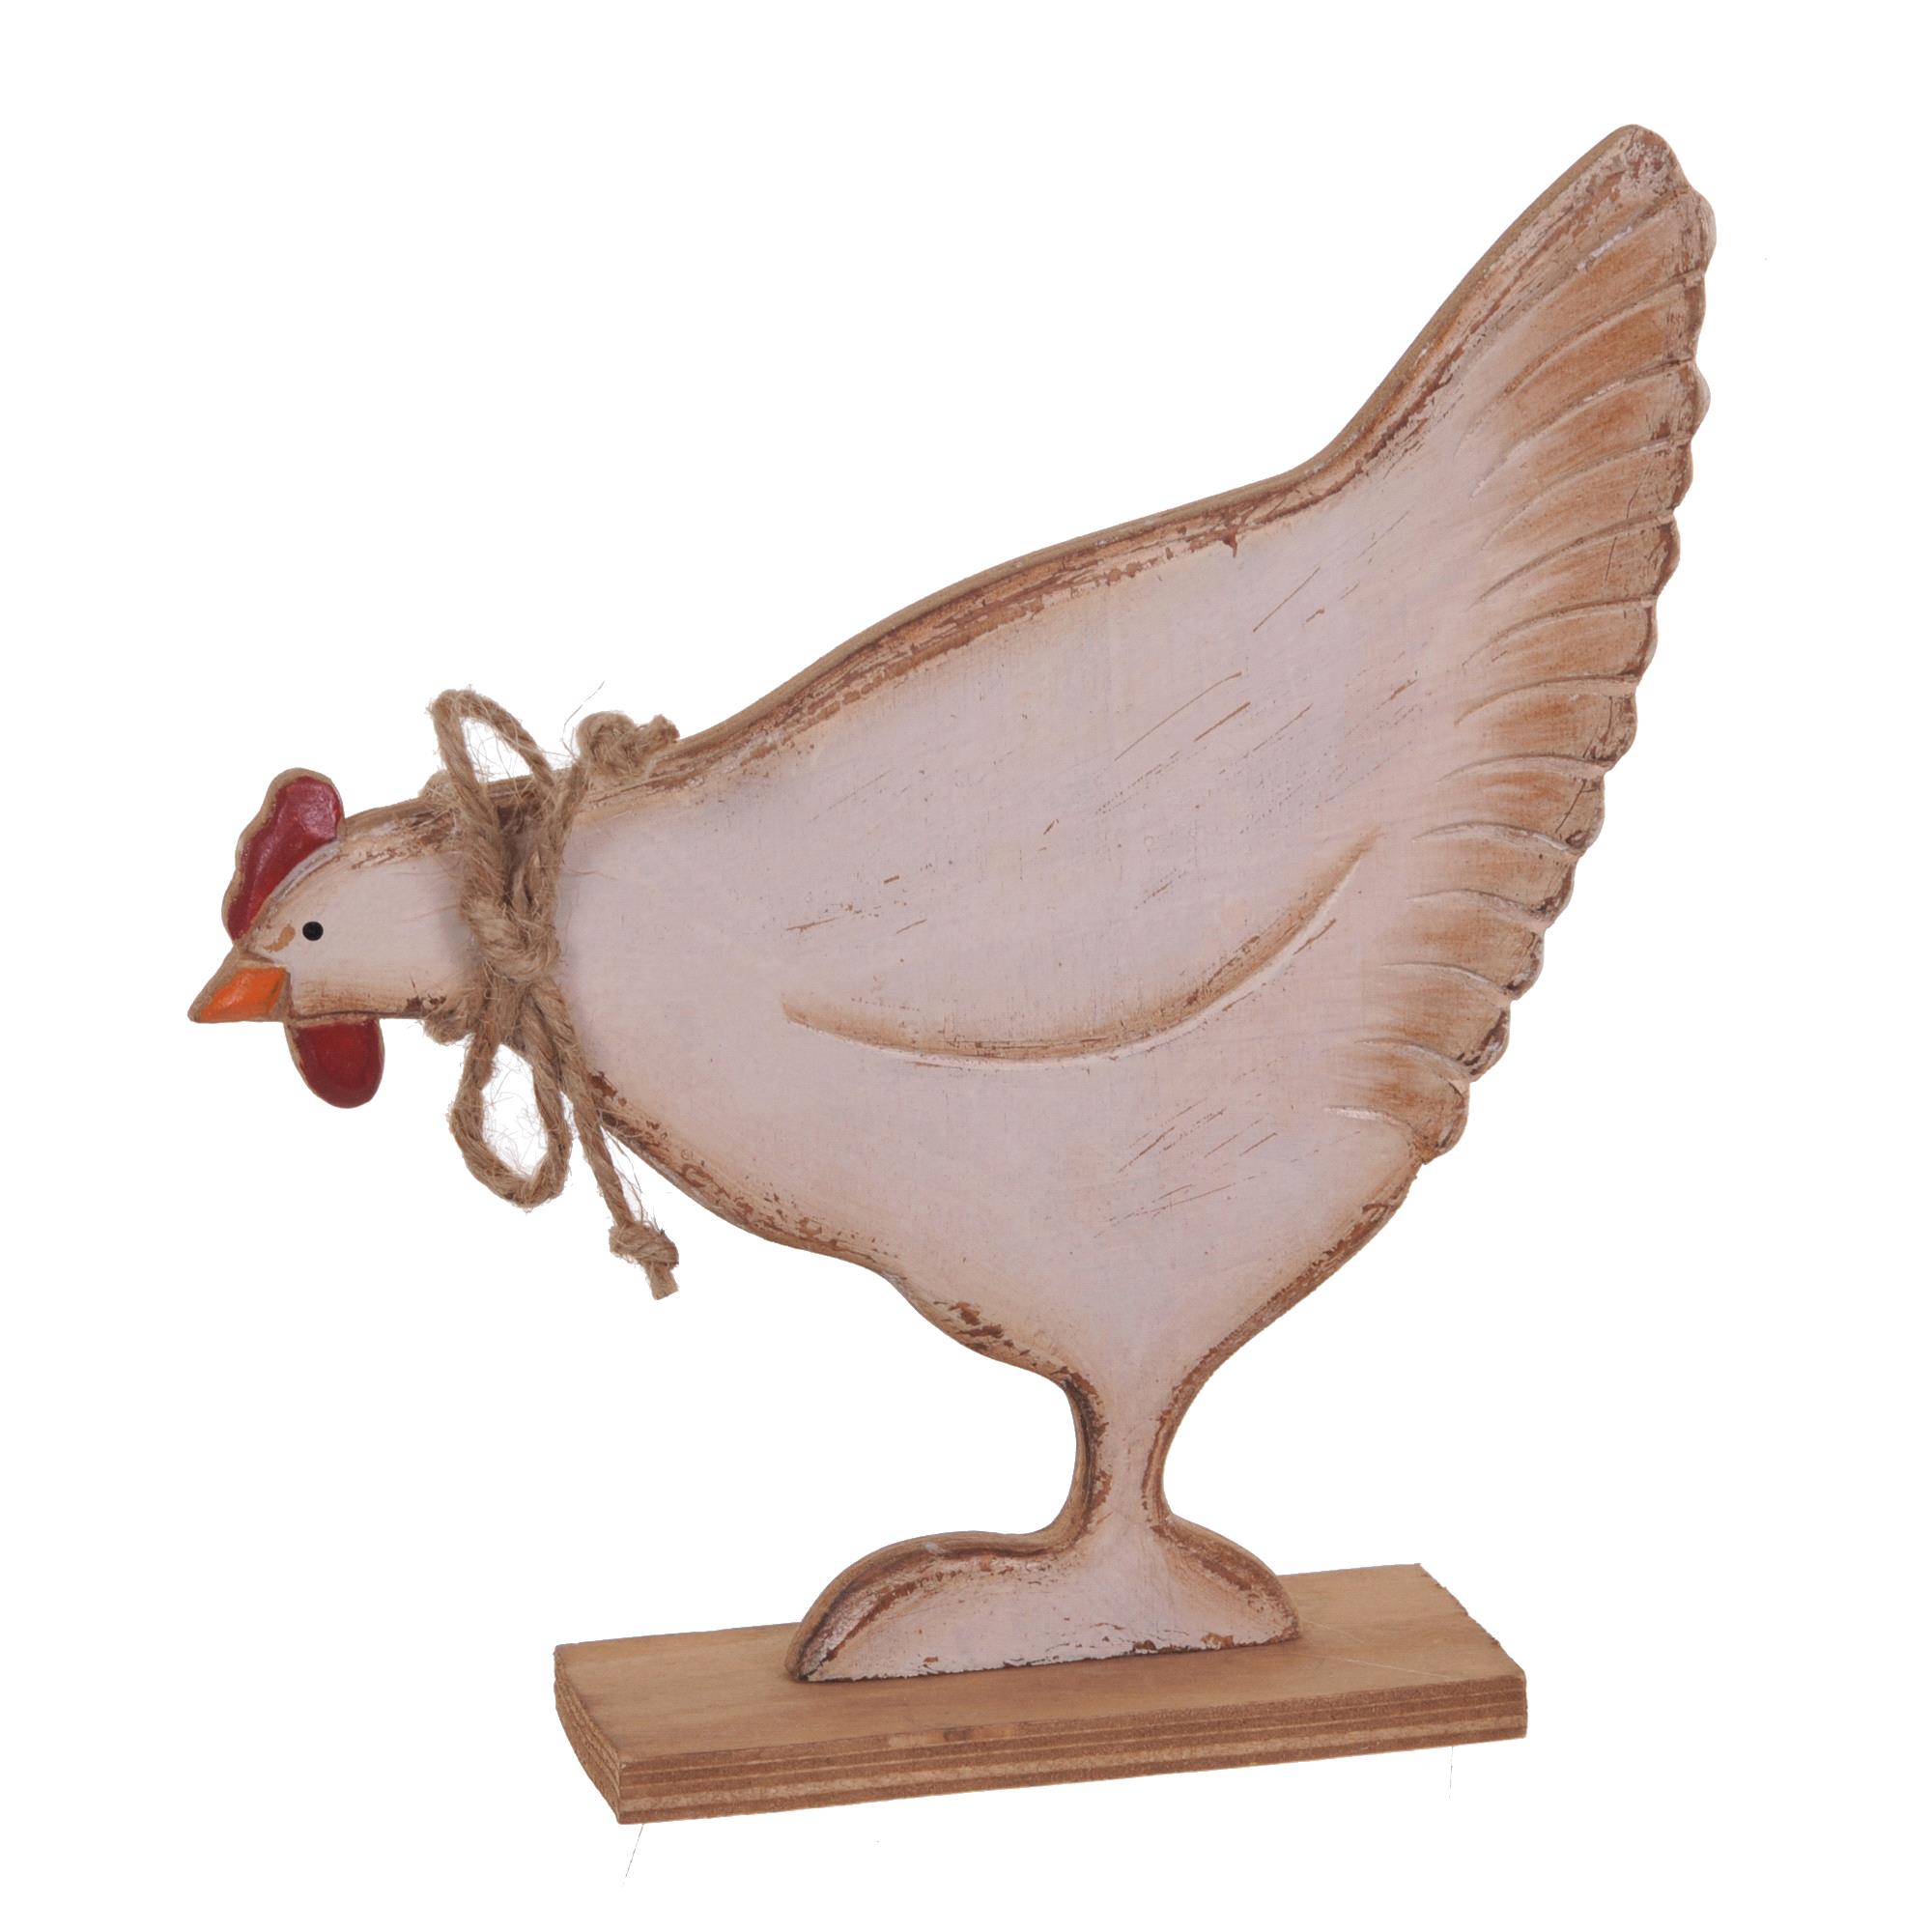 CHRISTMAS ITEMS,HANGING BALLS AND DECORATIONS IN METAL,GALLINA LEGNO 20,5 CM